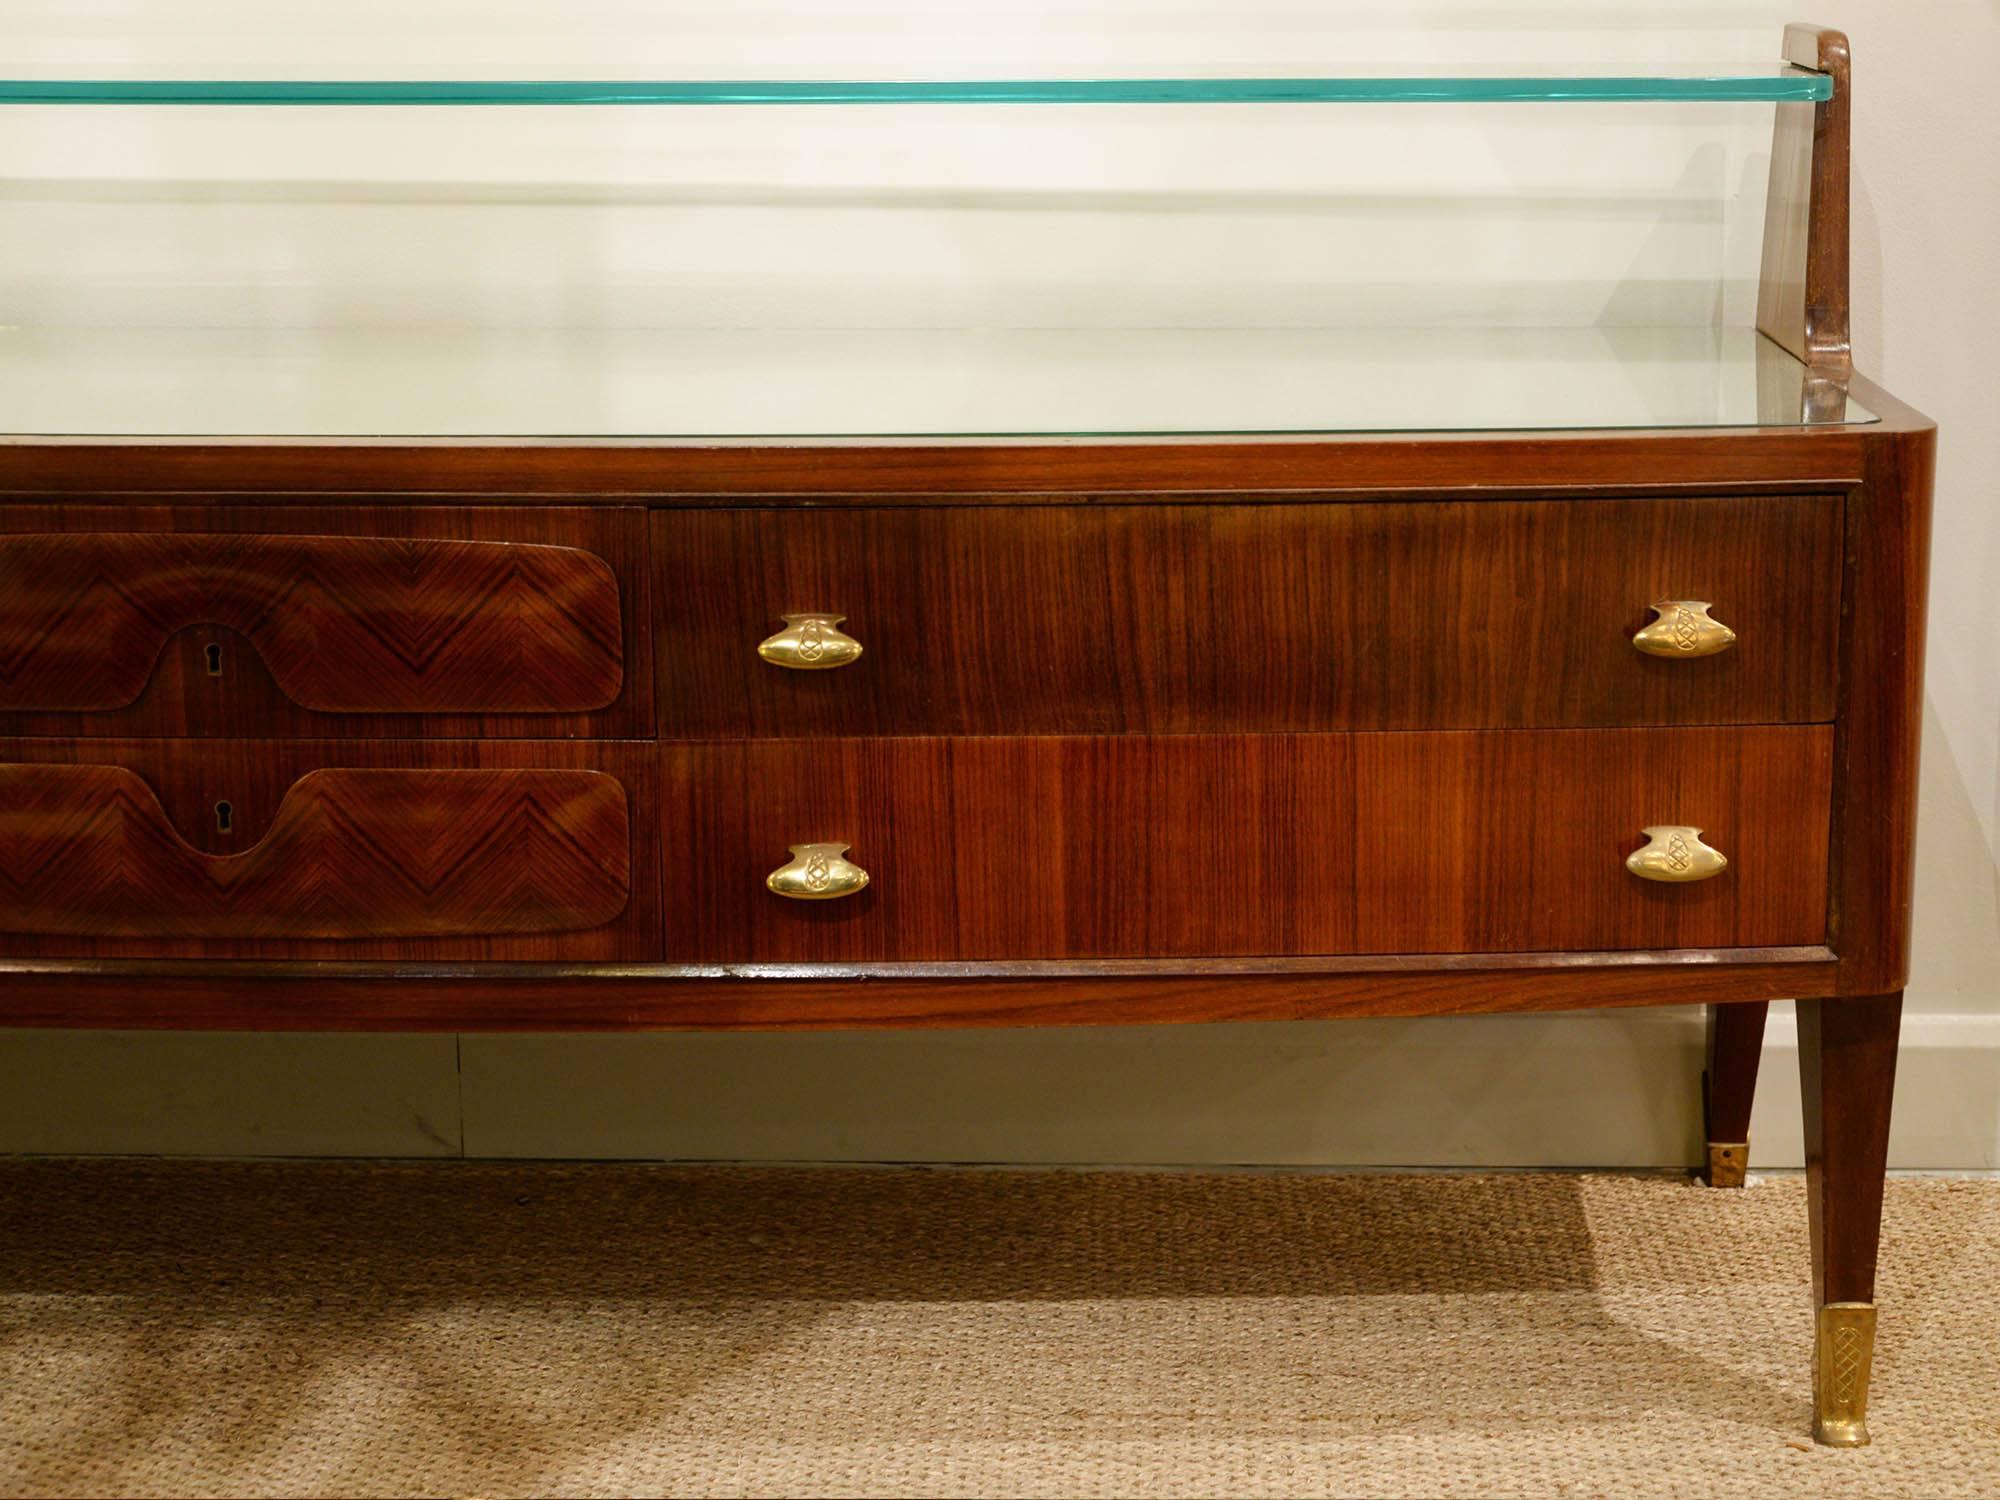 Mid-20th Century Italian Sideboard from 1950s with Walnut Wood and Brass